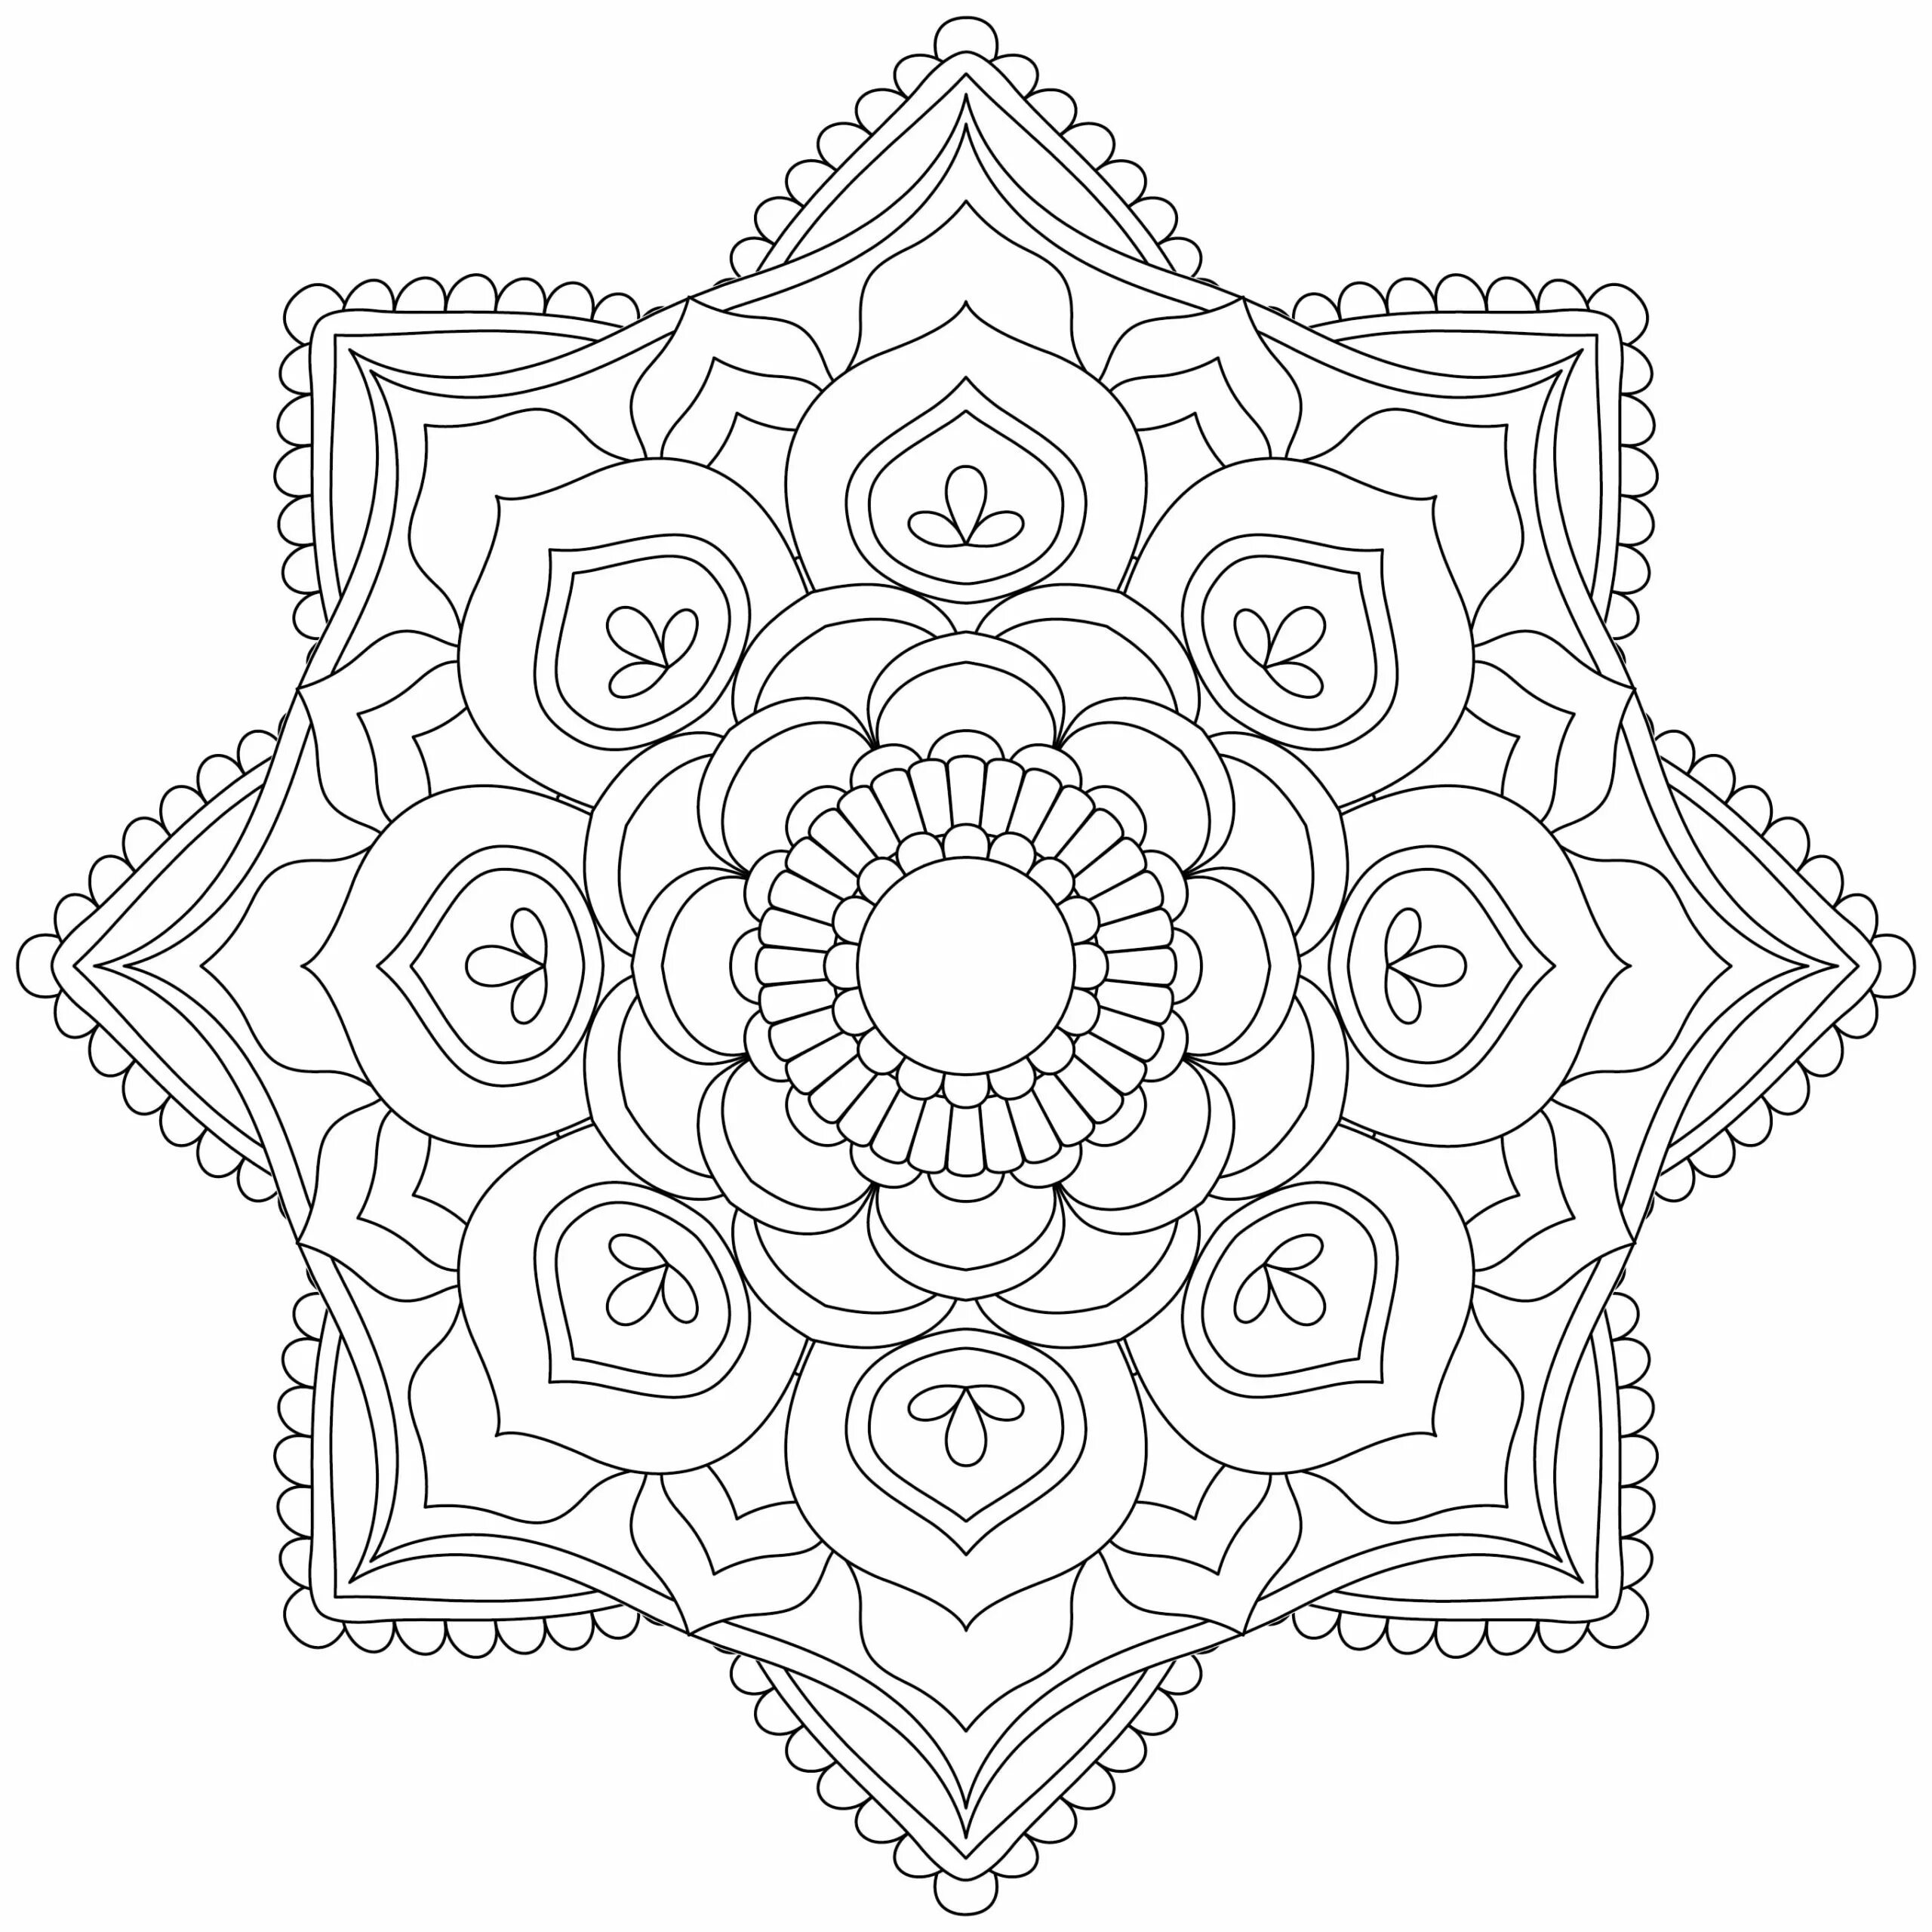 Harmonious coloring mandala of peace and tranquility